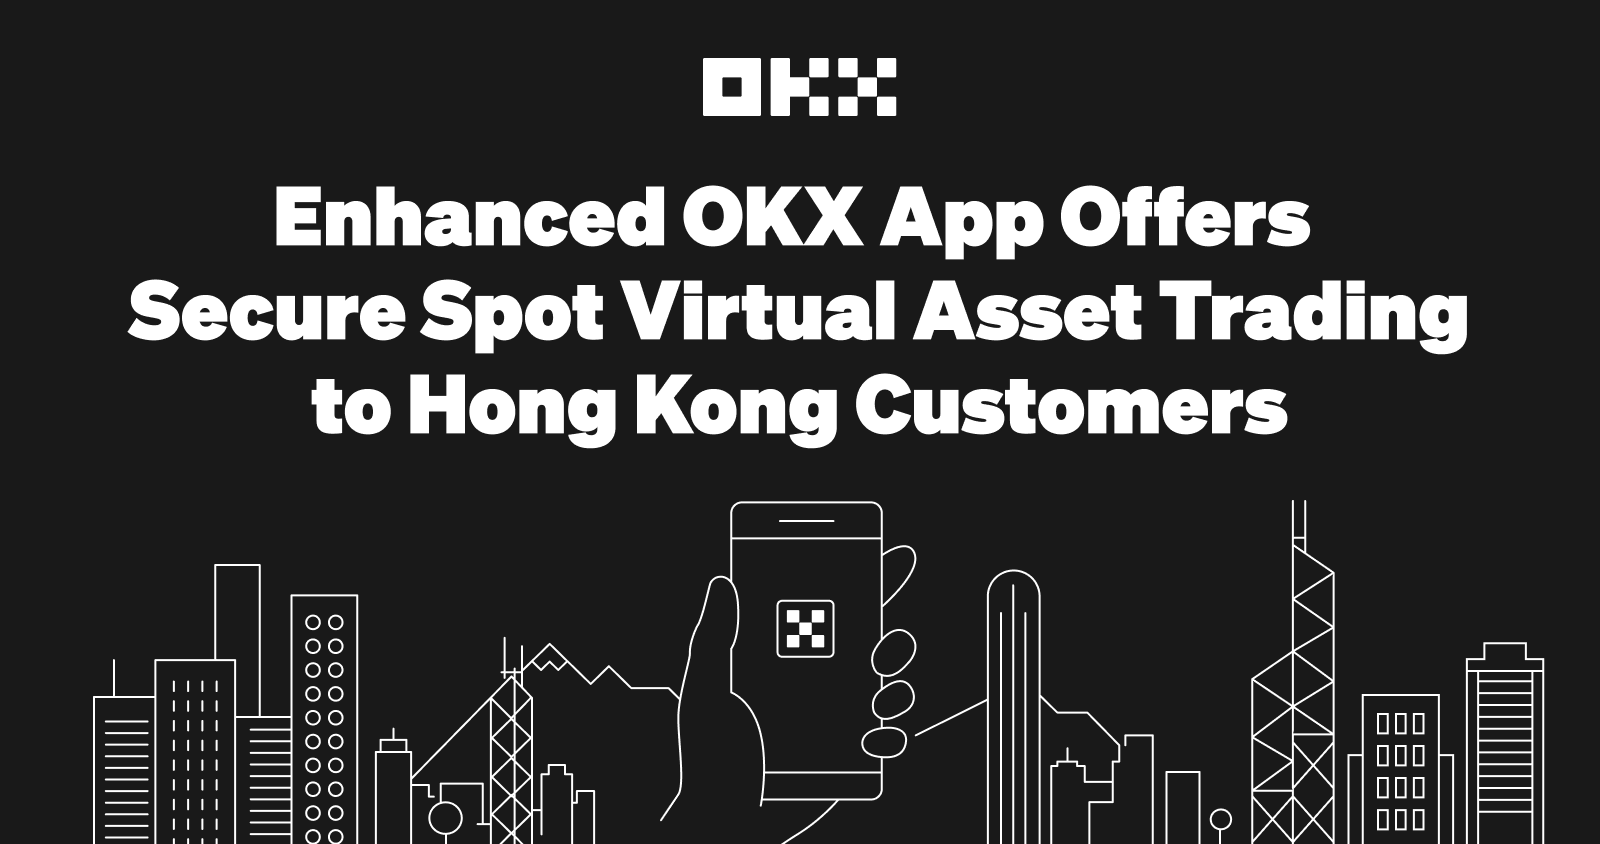 Enhanced OKX App Offers Safe and Secure Spot Virtual Asset Trading to Hong Kong Customers